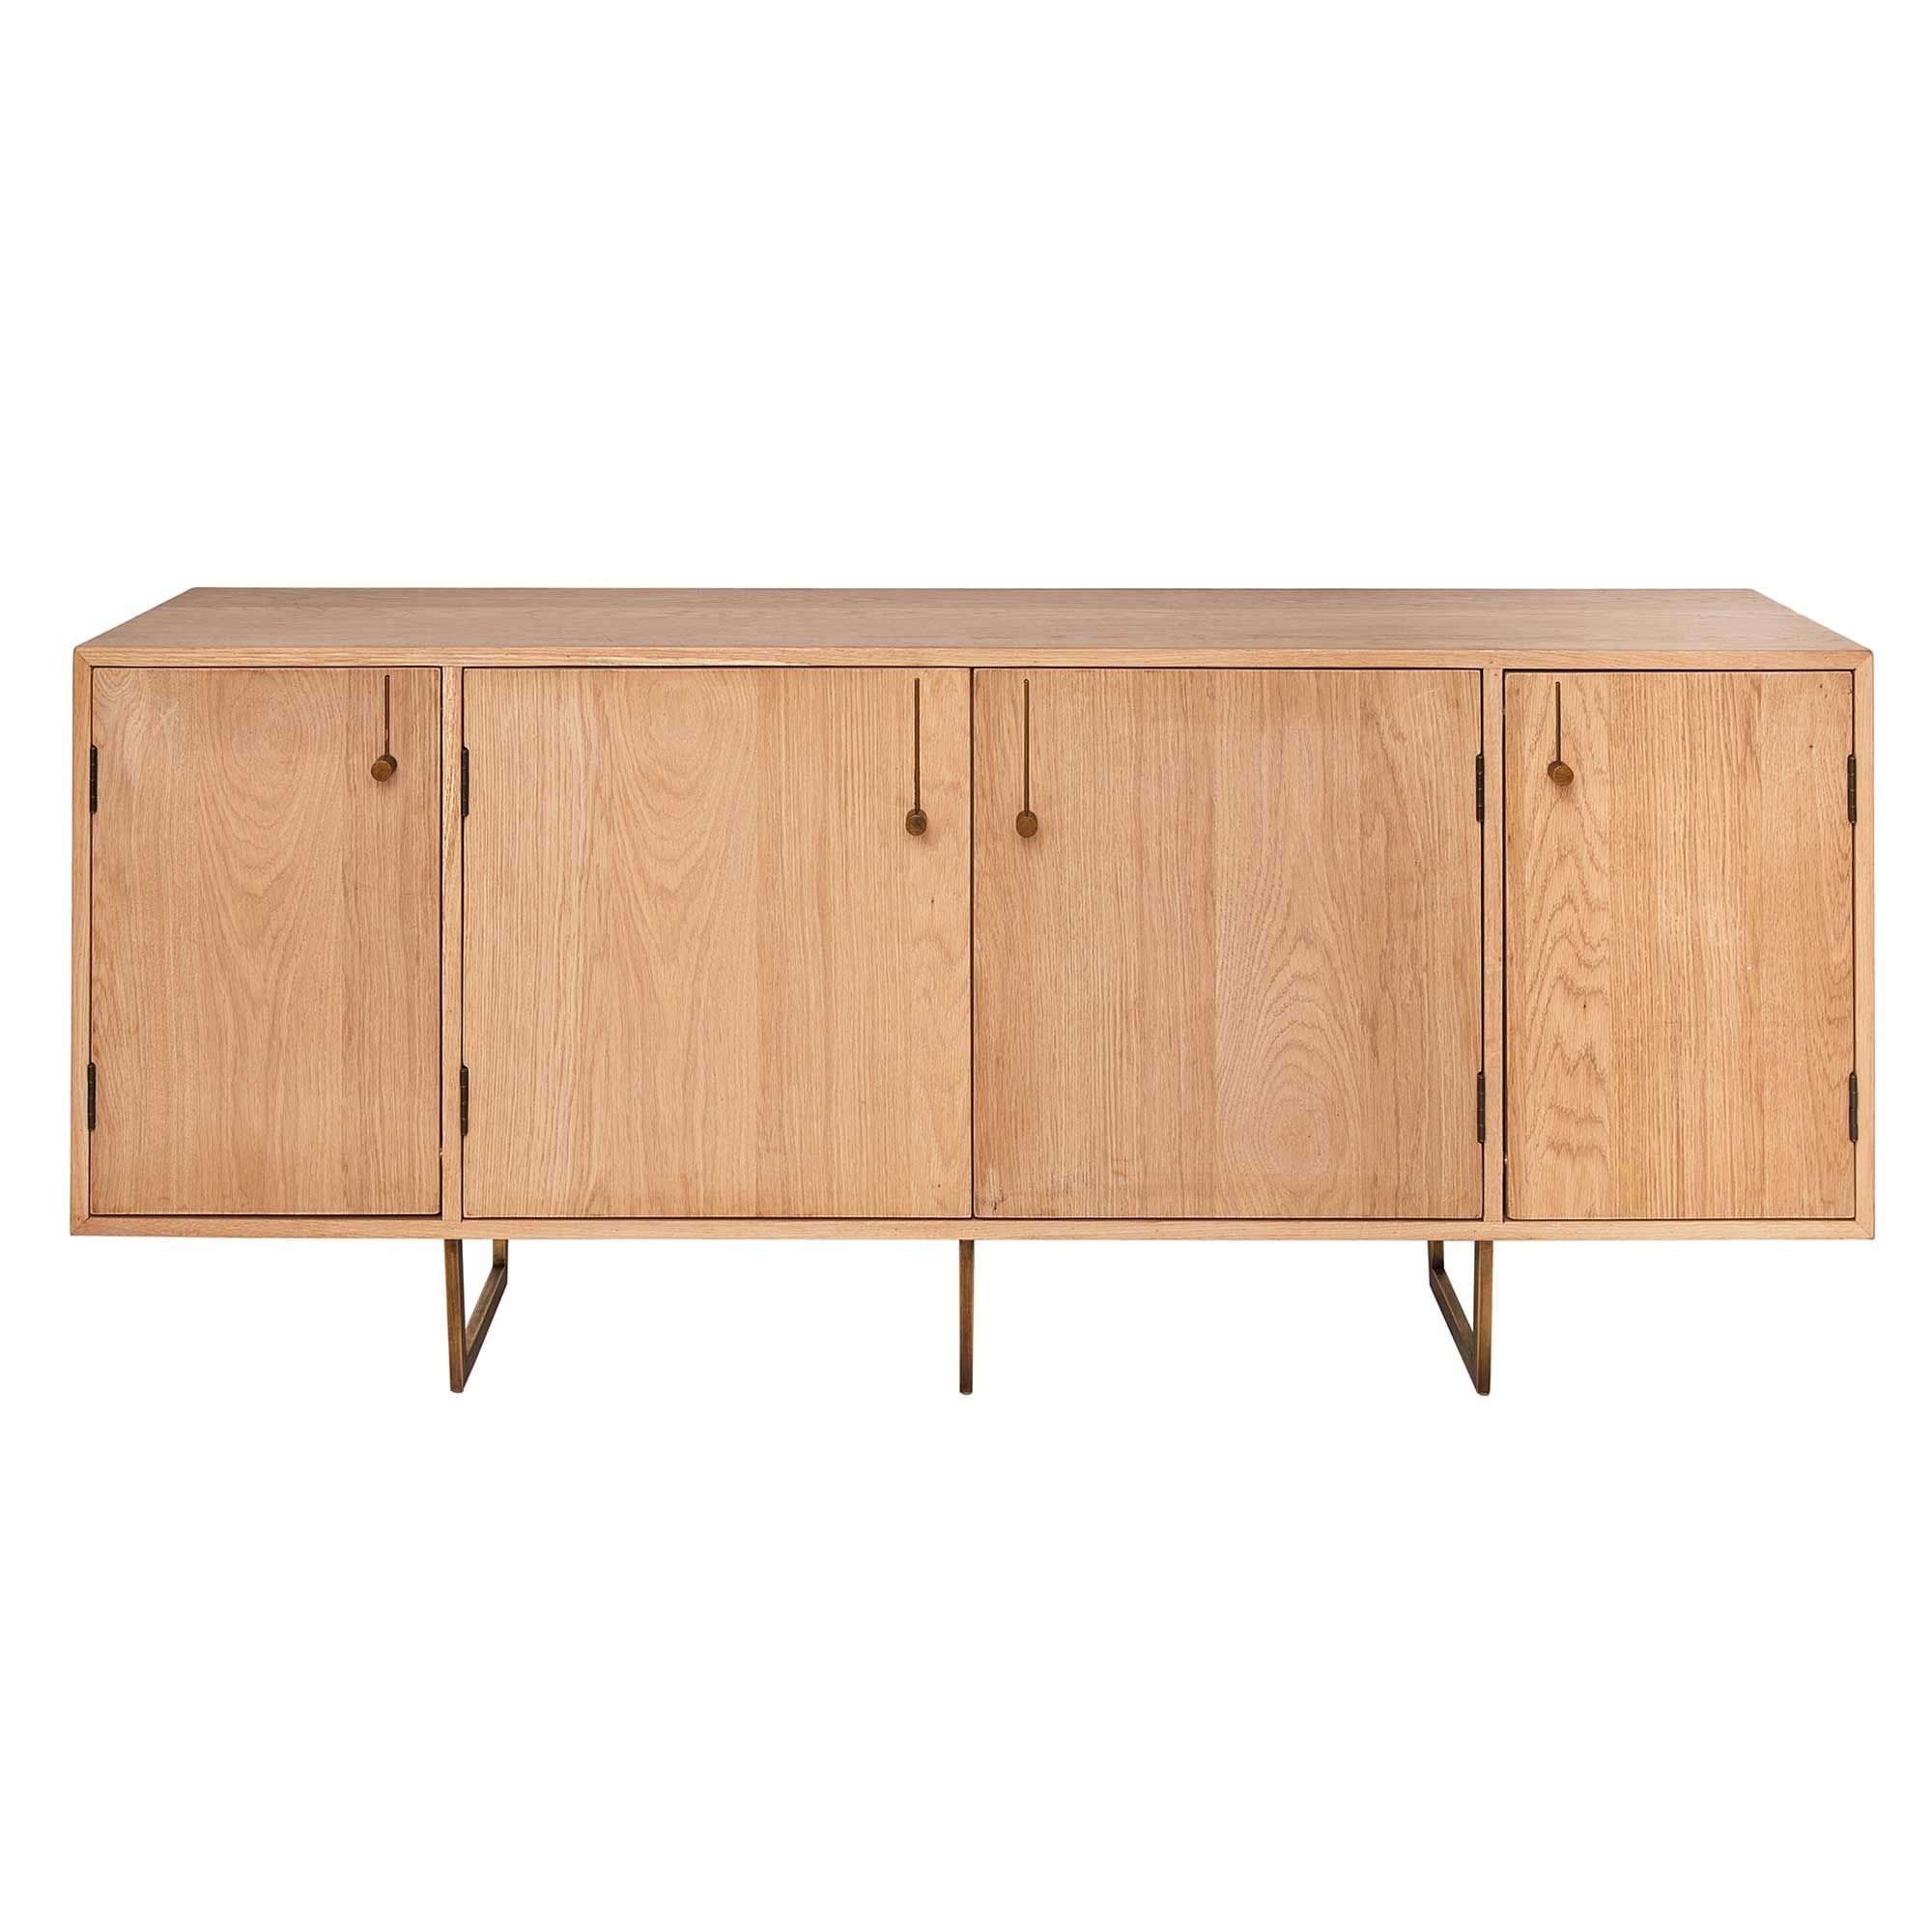 Cosmo Sideboard, Golden Oak And Brass | Sideboards | Dining Room Inside Latest Burnt Oak Wood Sideboards (View 6 of 20)